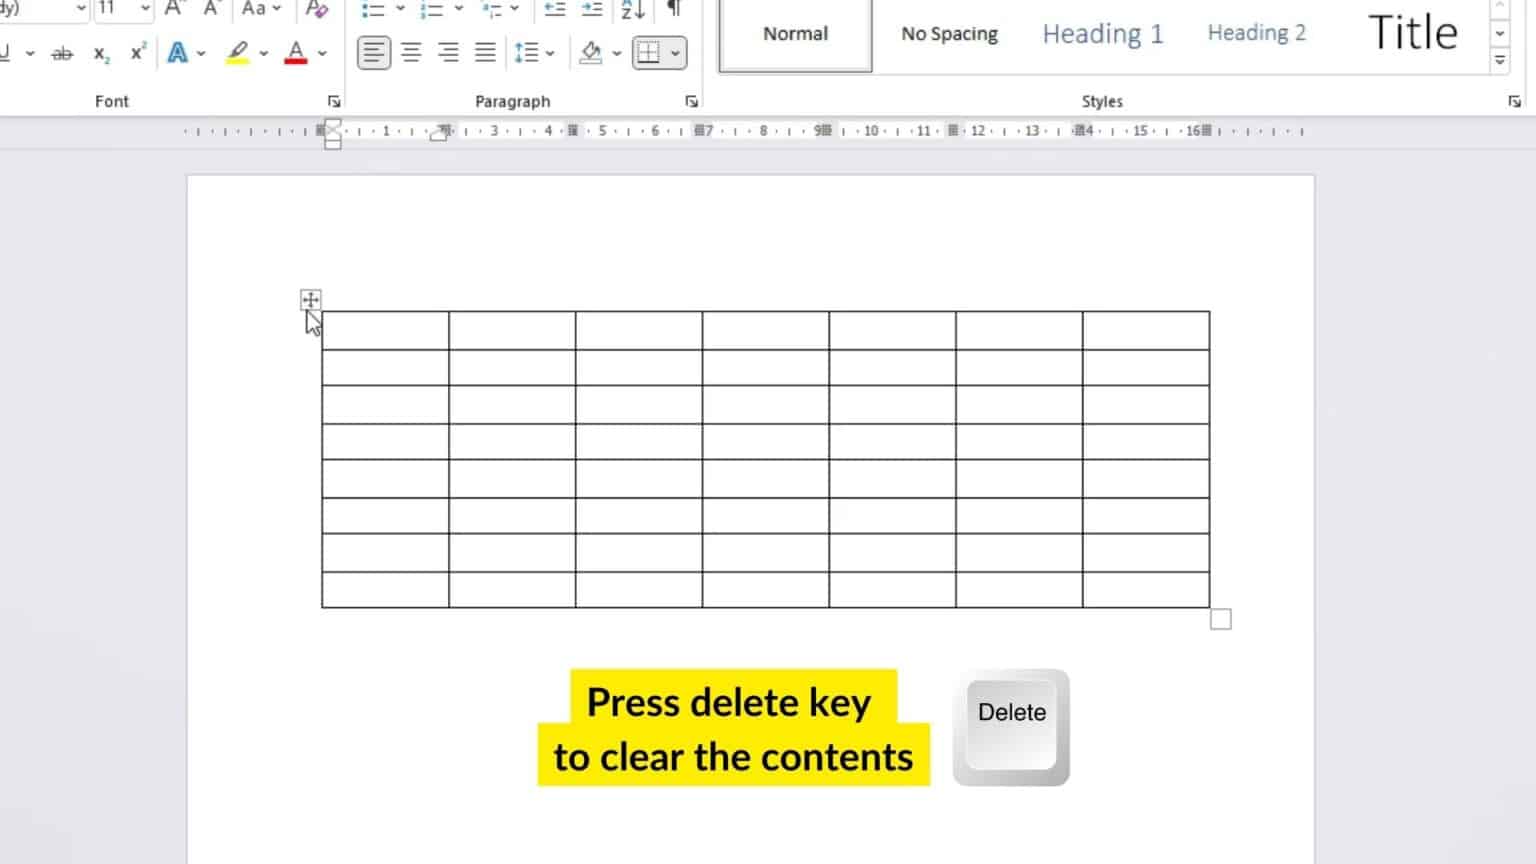 microsoft word table content control